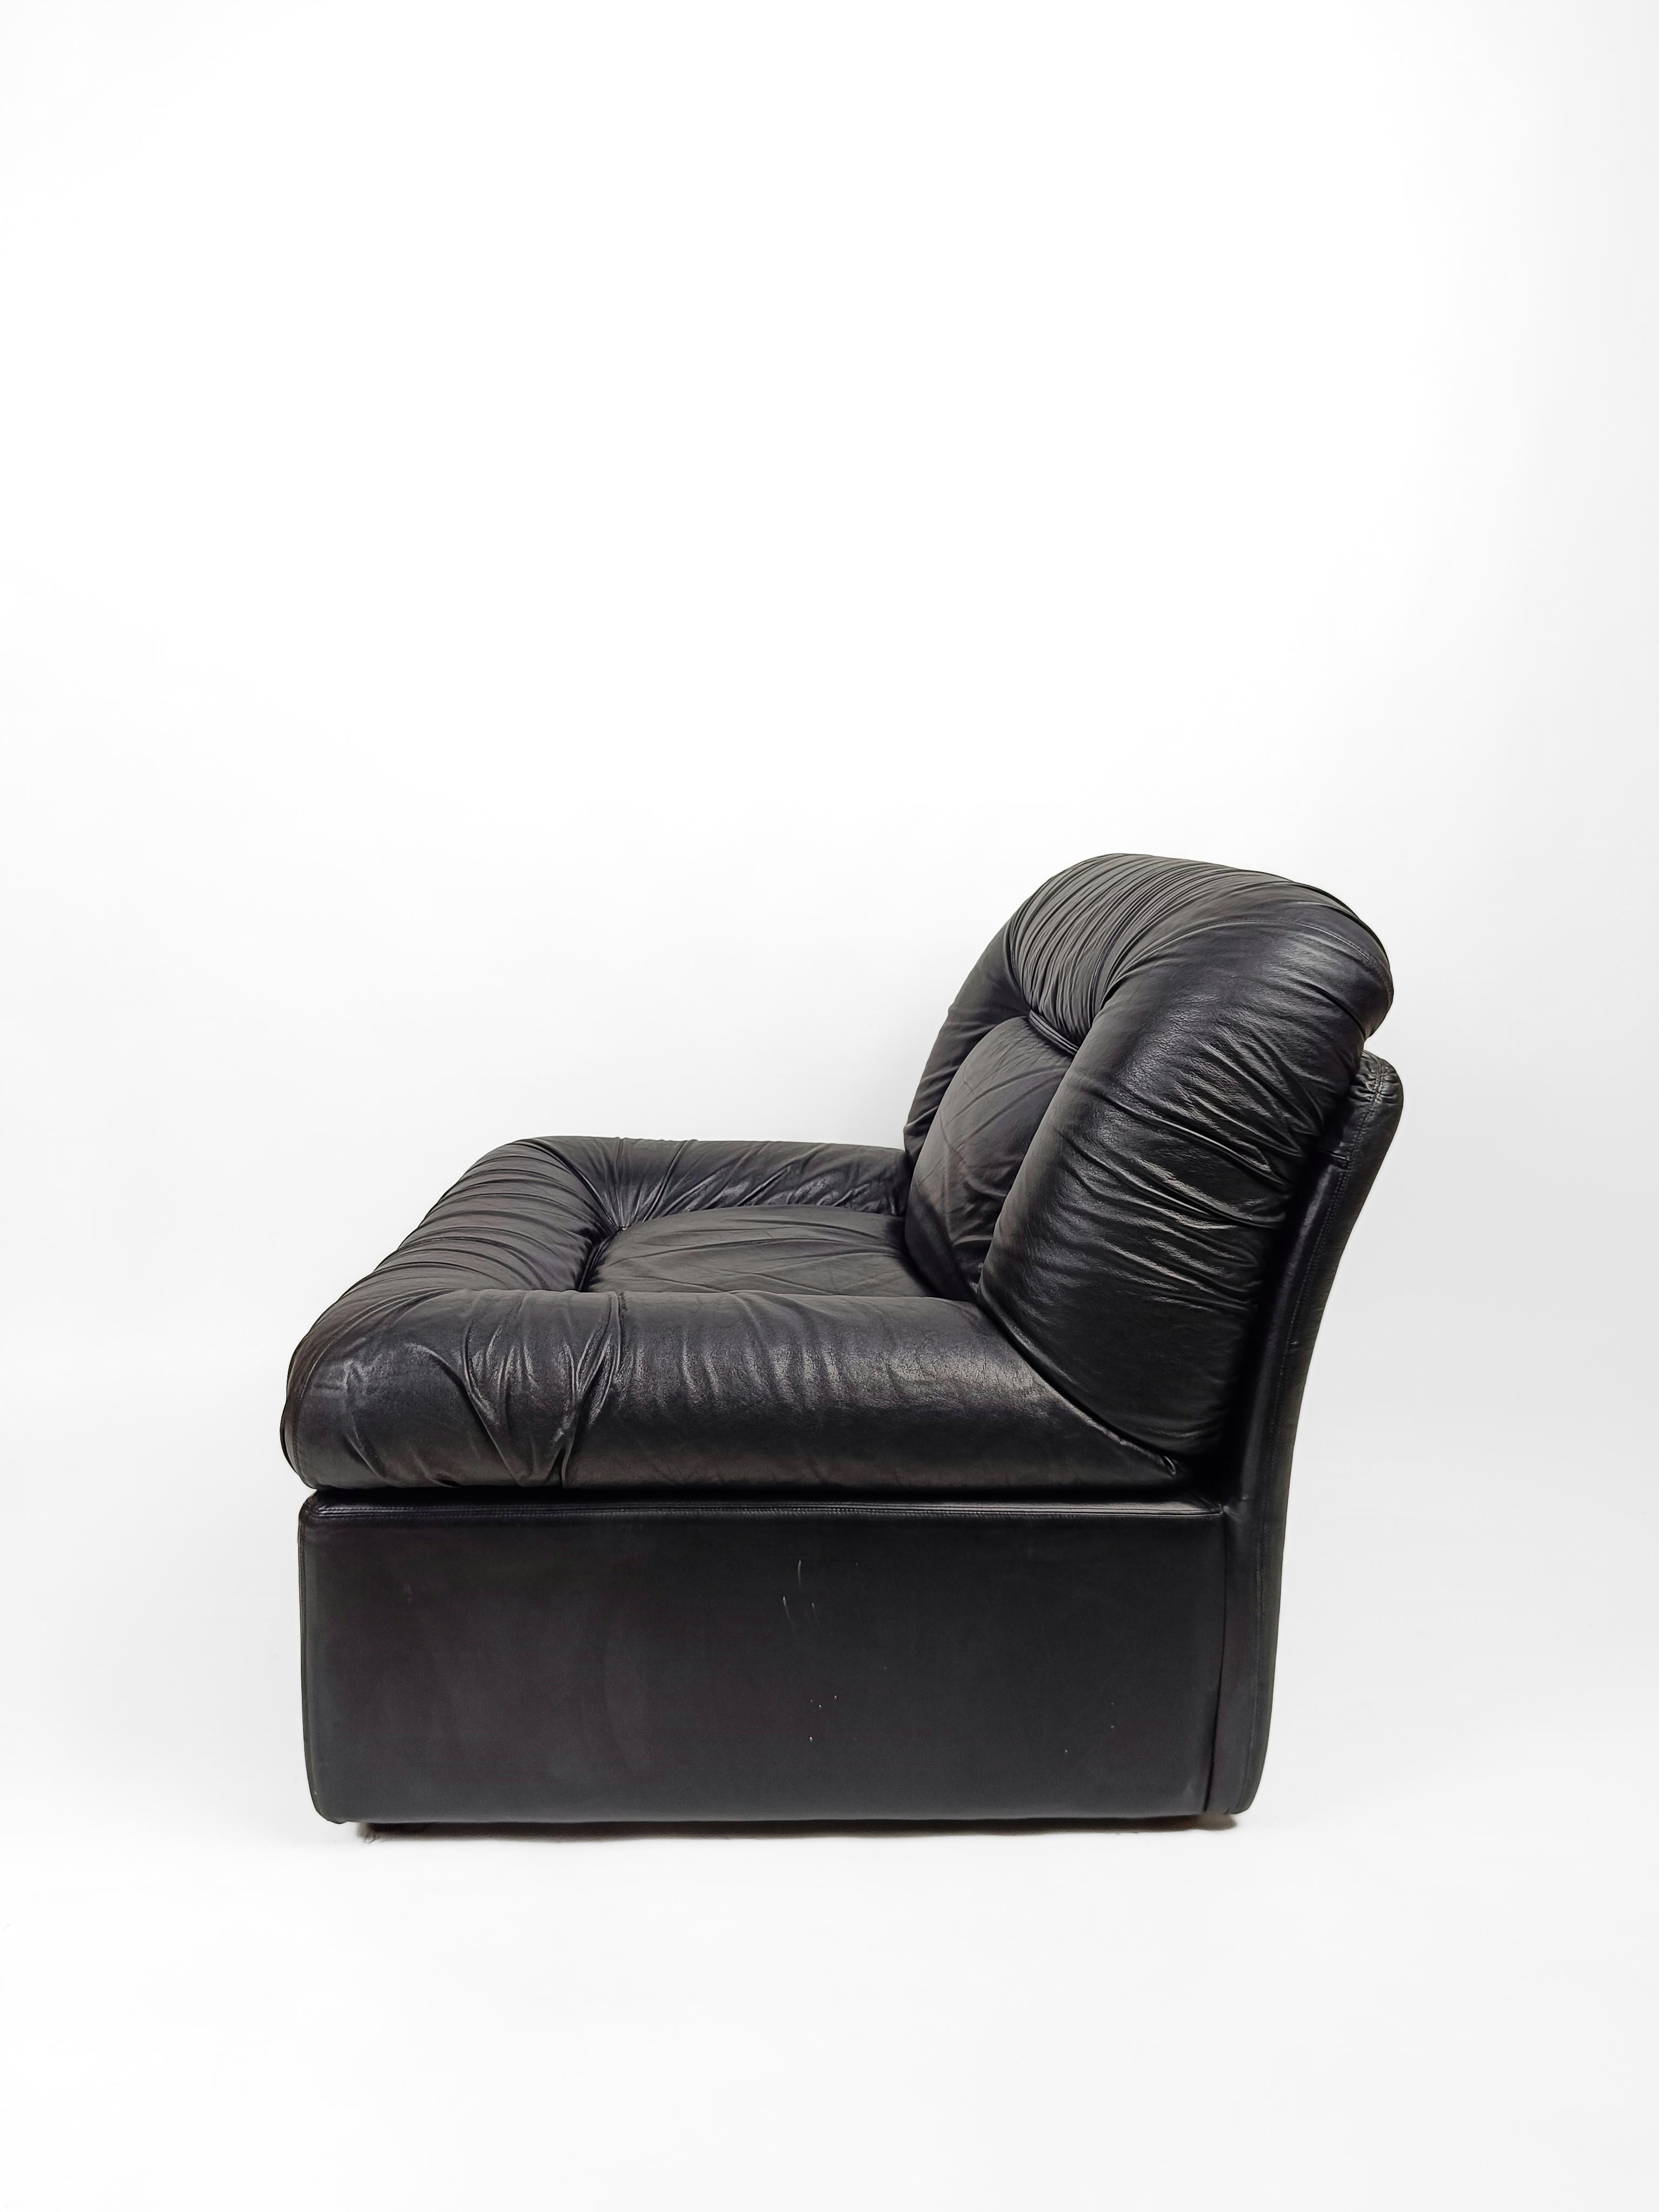 Italian Modular Lounge Chair in Black Leather model PANAREA by Lev & Lev, 1970s  For Sale 10